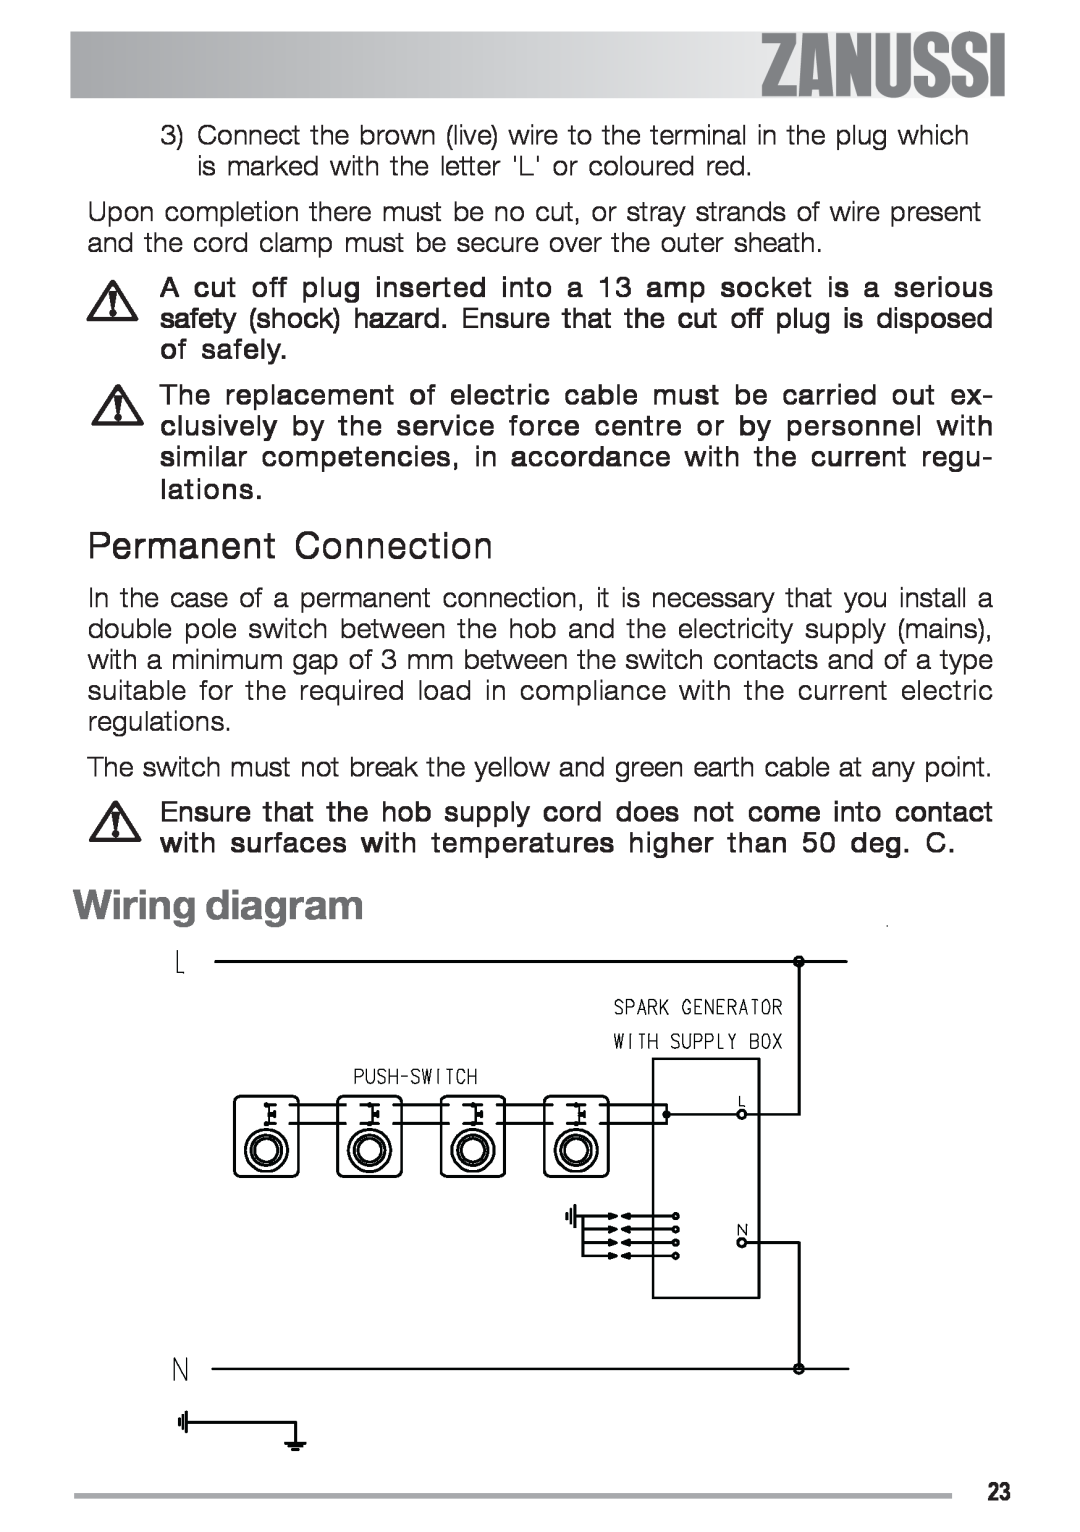 Zanussi ZGS 682 ICT manual Wiring diagram, Permanent Connection 